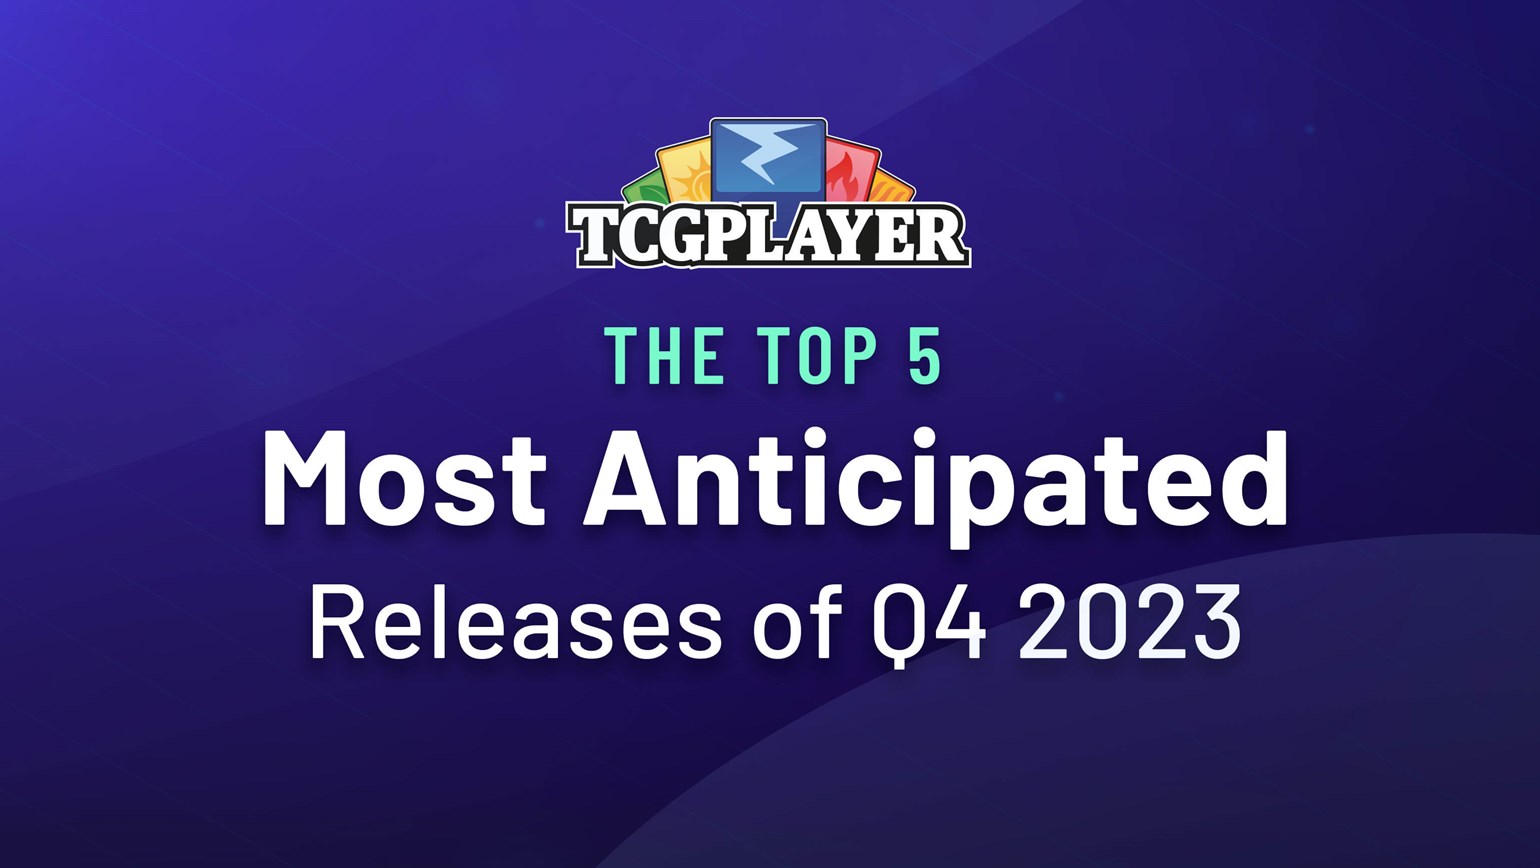 The Top 5 Most Anticipated Releases of Q4 2023